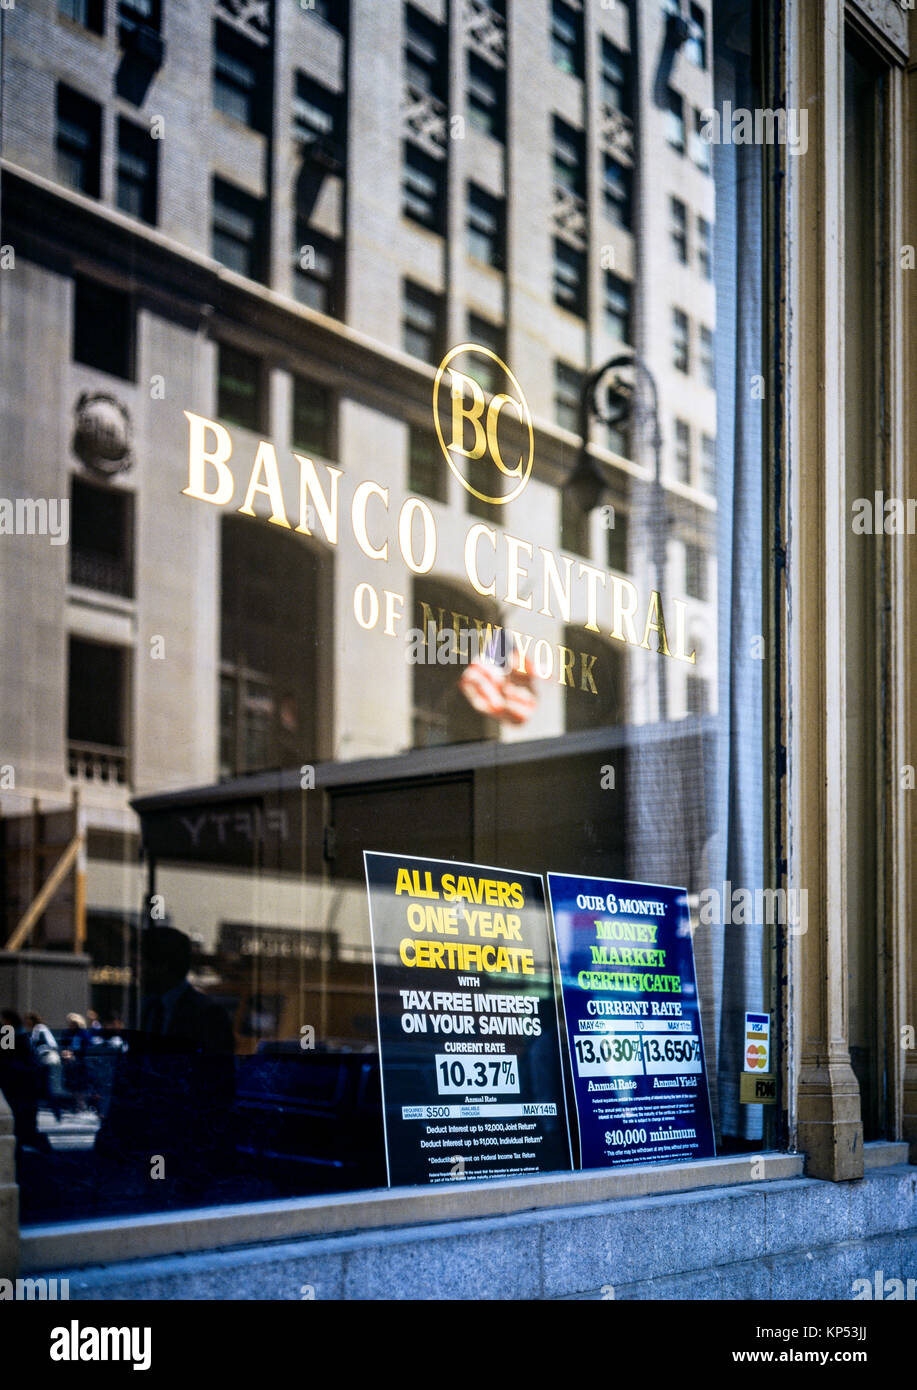 May 1982,New York,Banco Central of New York bank,branch office,high interest notice,Manhattan,New york City,NY,NYC,USA, Stock Photo